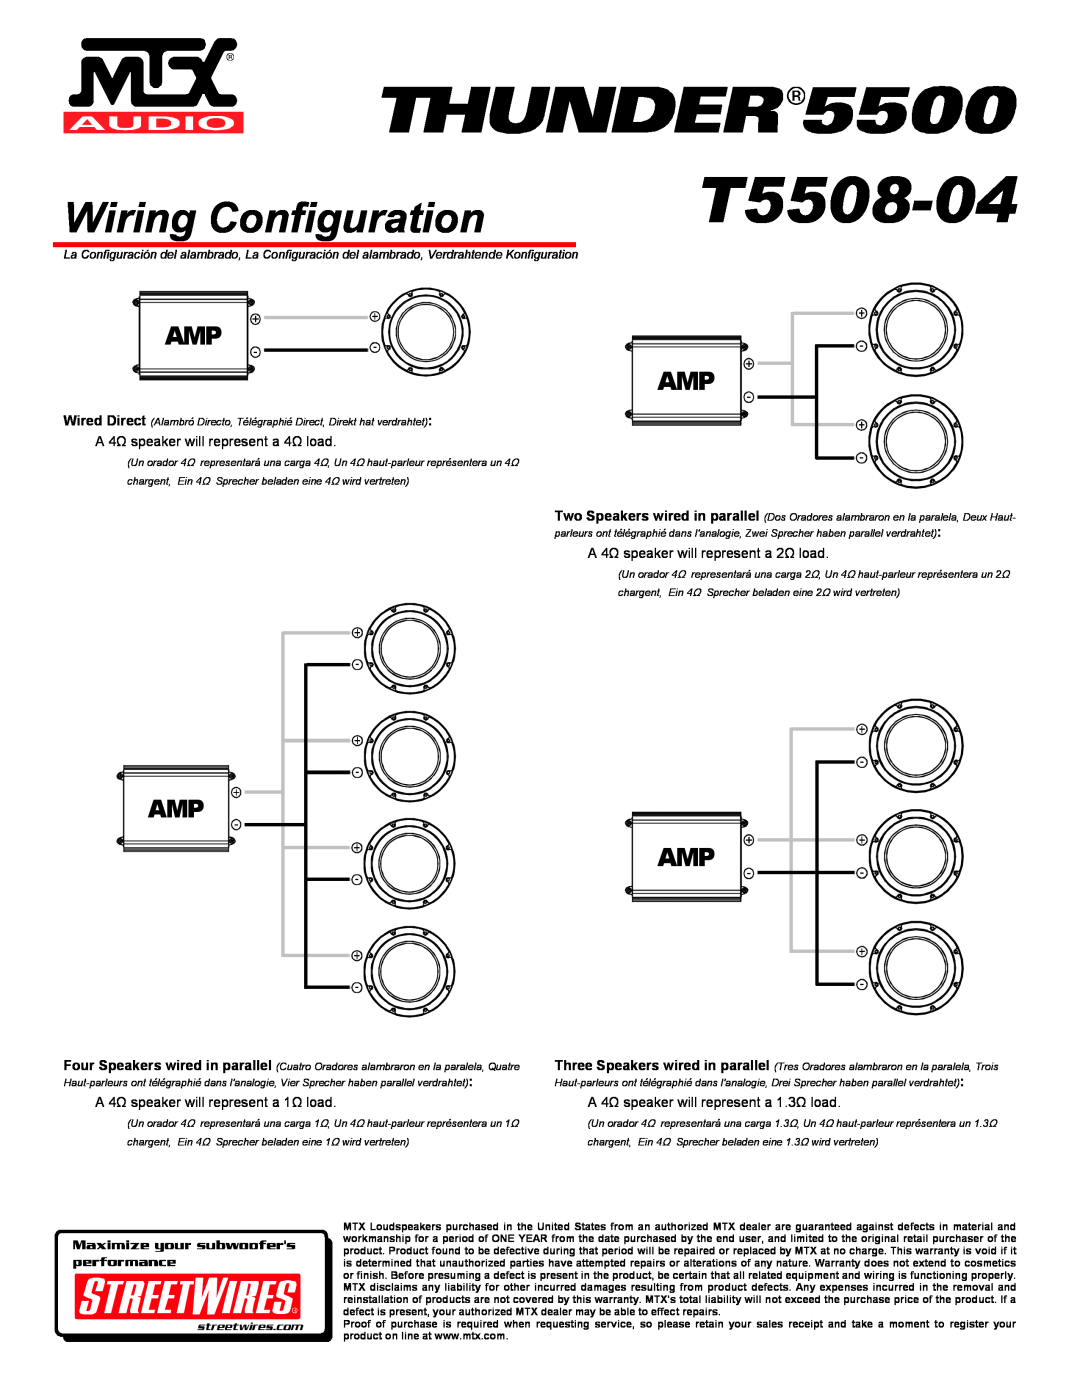 MTX Audio T5508-04 Wiring Configuration, A 4Ω speaker will represent a 4Ω load, A 4Ω speaker will represent a 2Ω load 